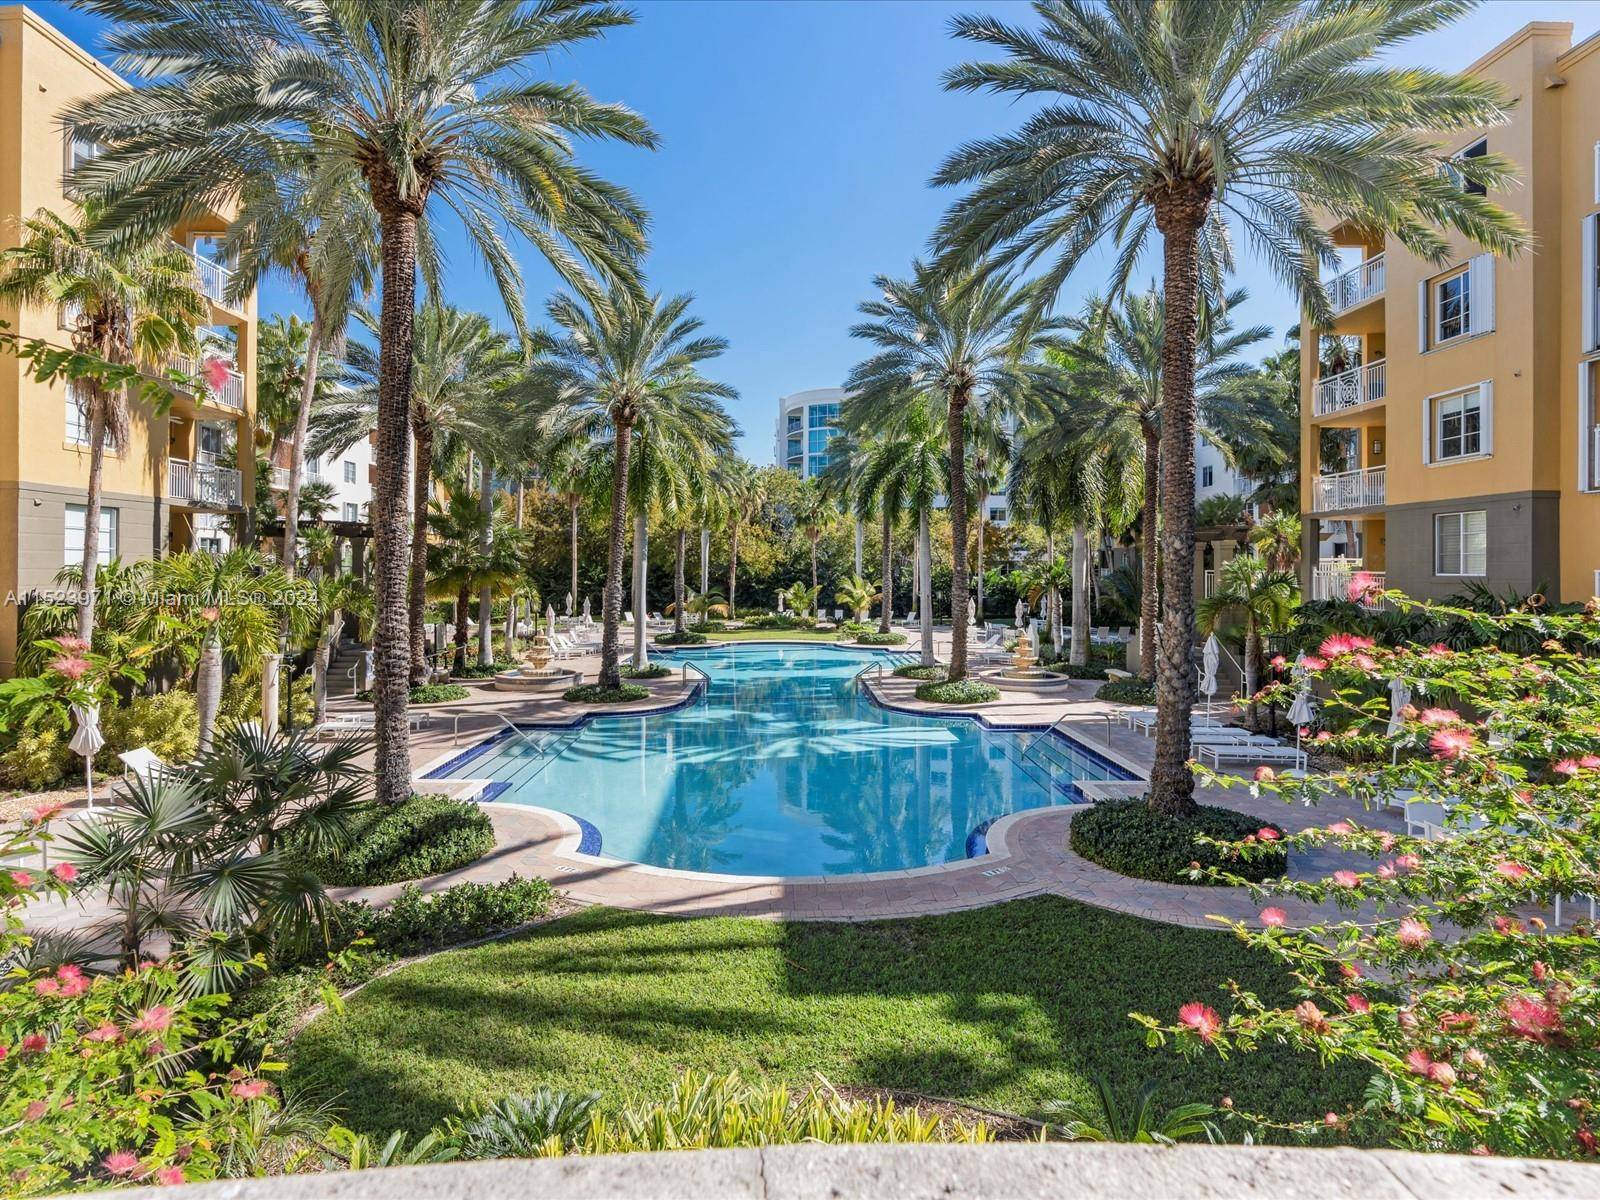 Great opportunity ! Bright and spacious 2 bedroom 2 bathroom lanai unit with easy access to the Grand Piazza pool area.